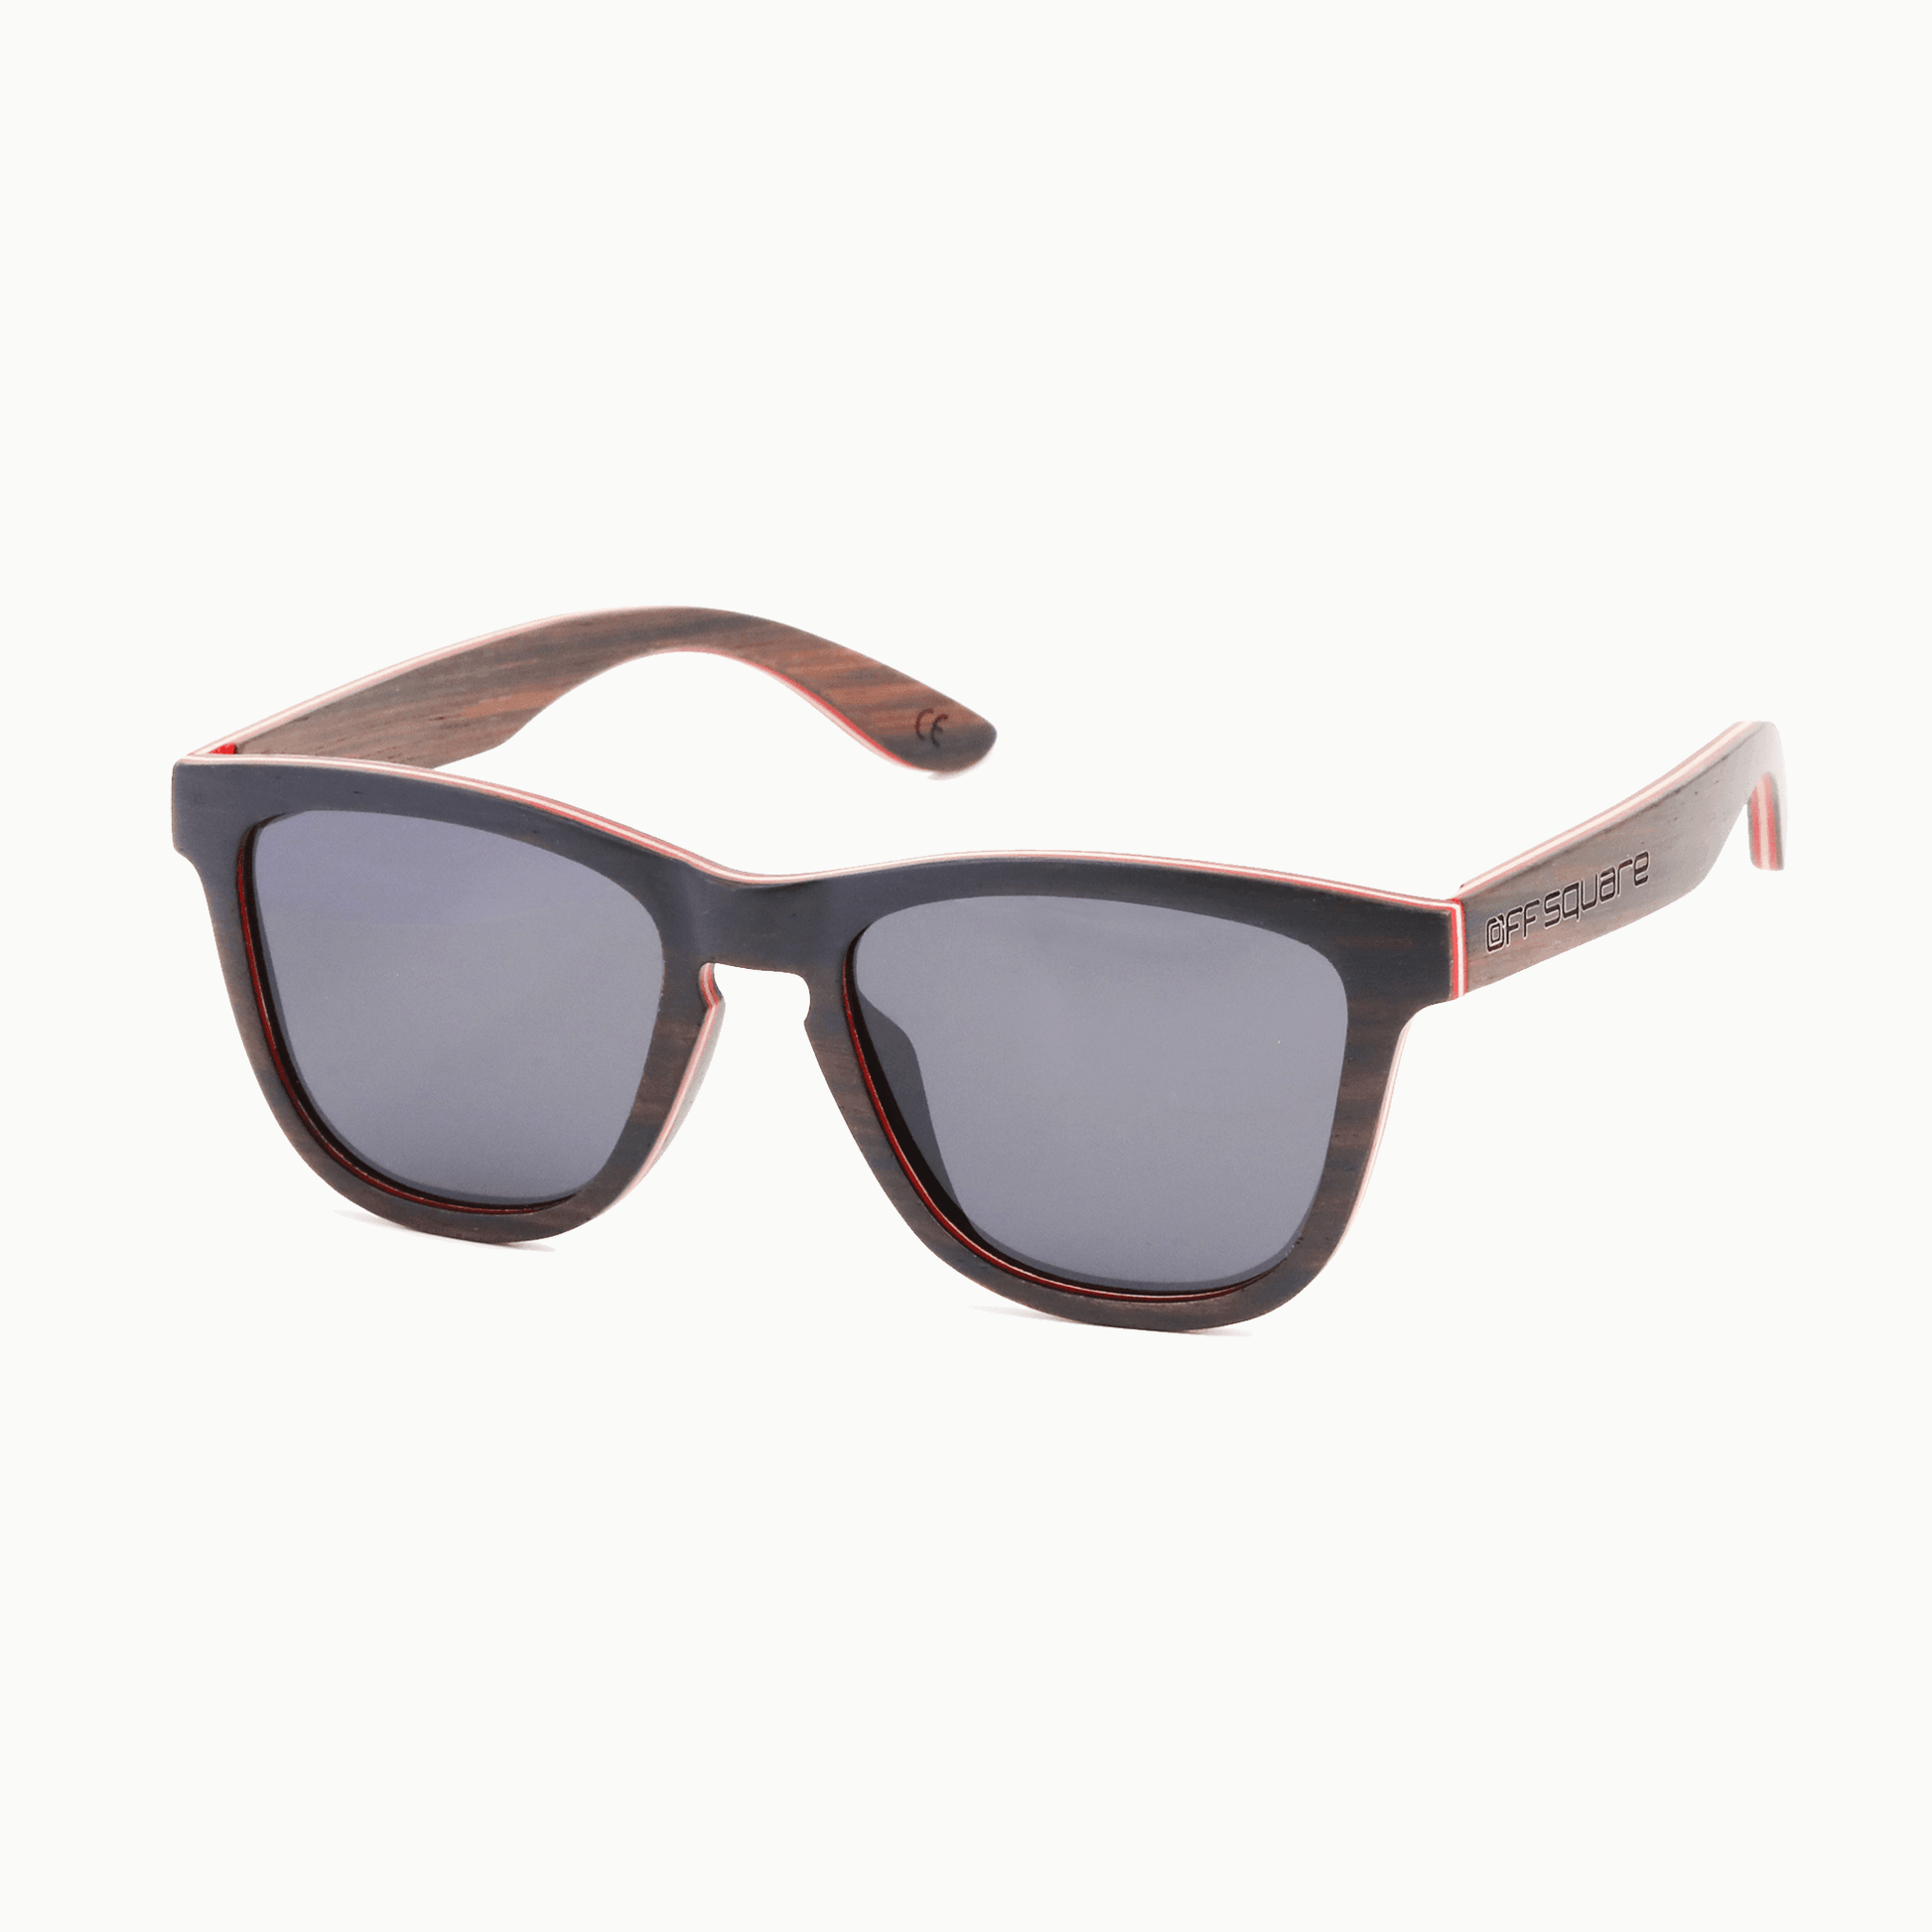 Clas Sunglasses Donker Bruin - offsquareofficial